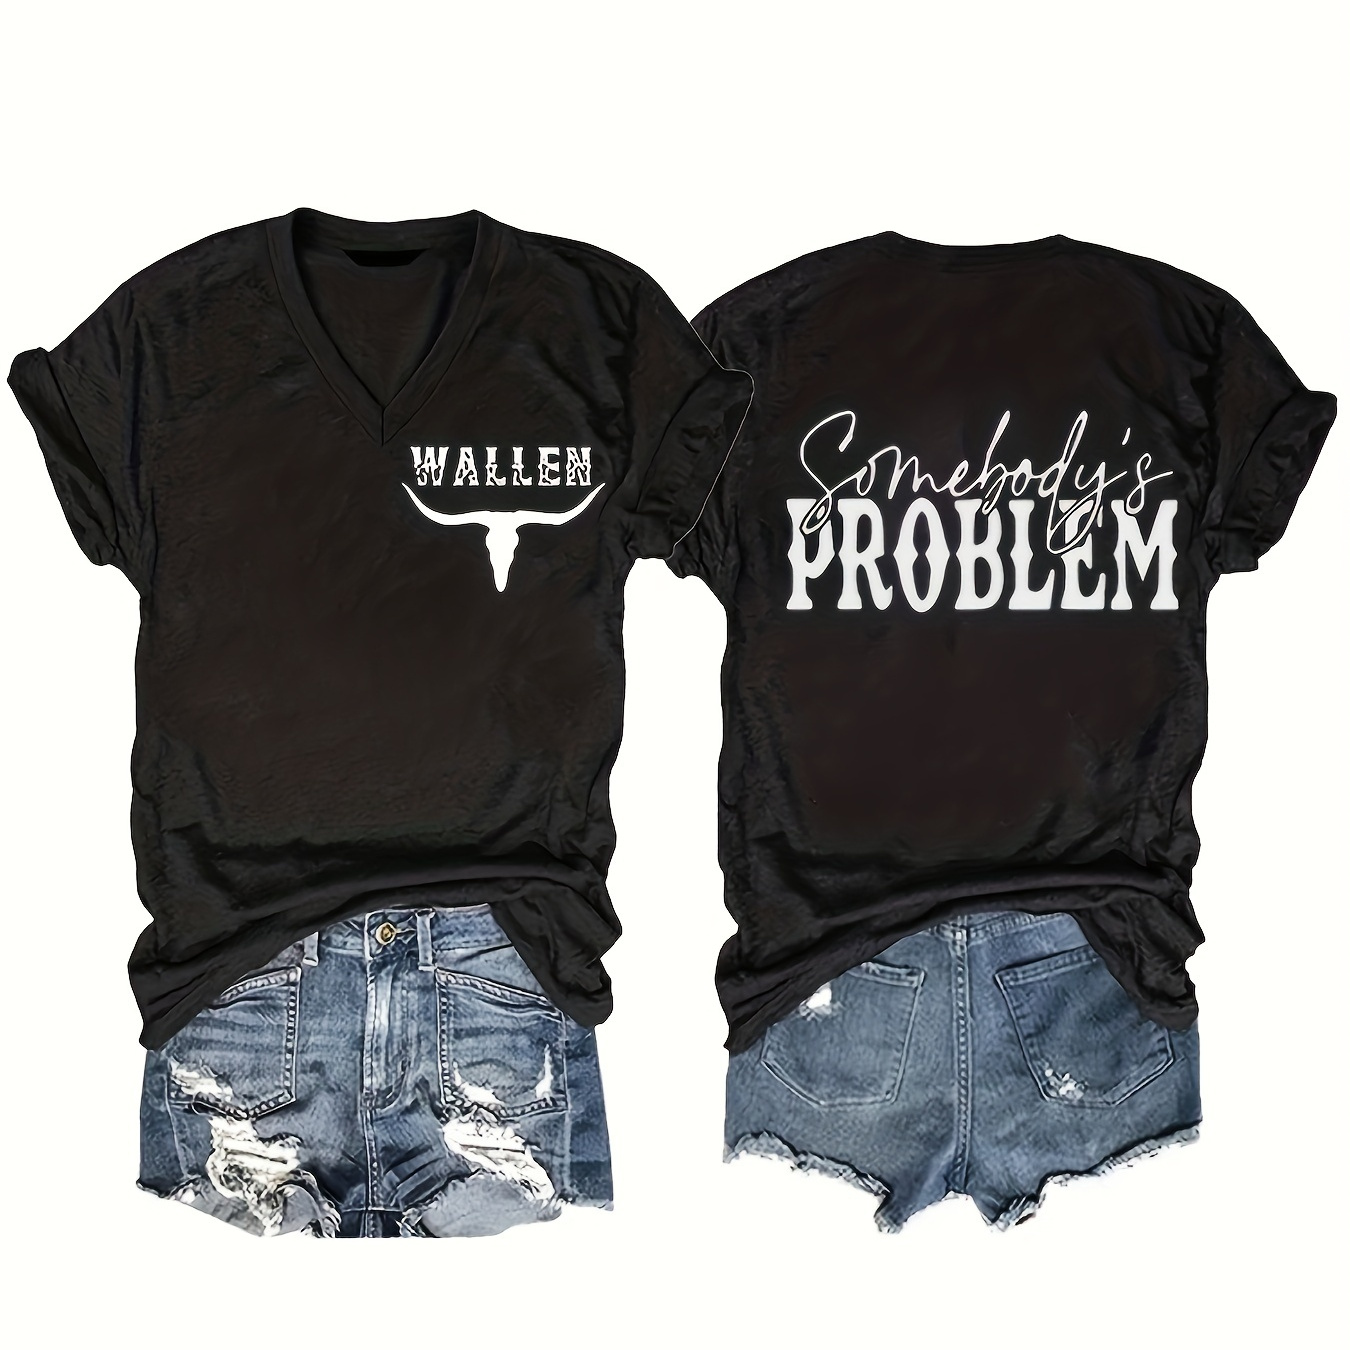 

Wallen Print T-shirt, Somebody's Problem Print V Neck Short Sleeve Casual Top For Summer & Spring, Women's Clothing